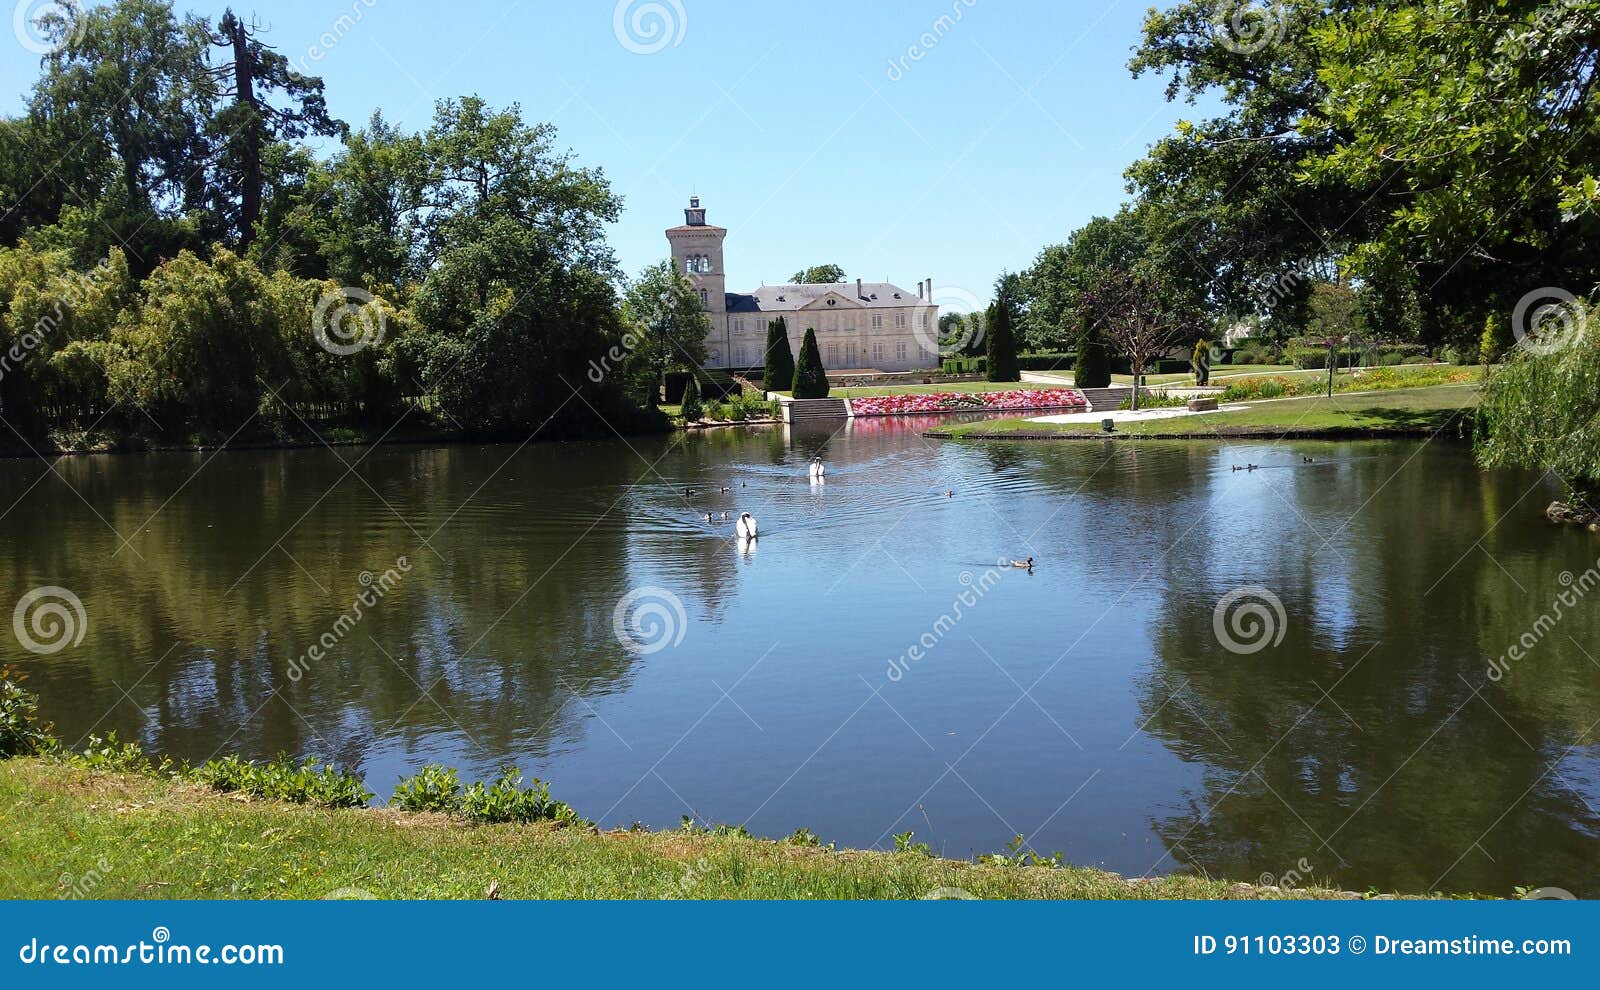 waterbirds in lake at french chateau